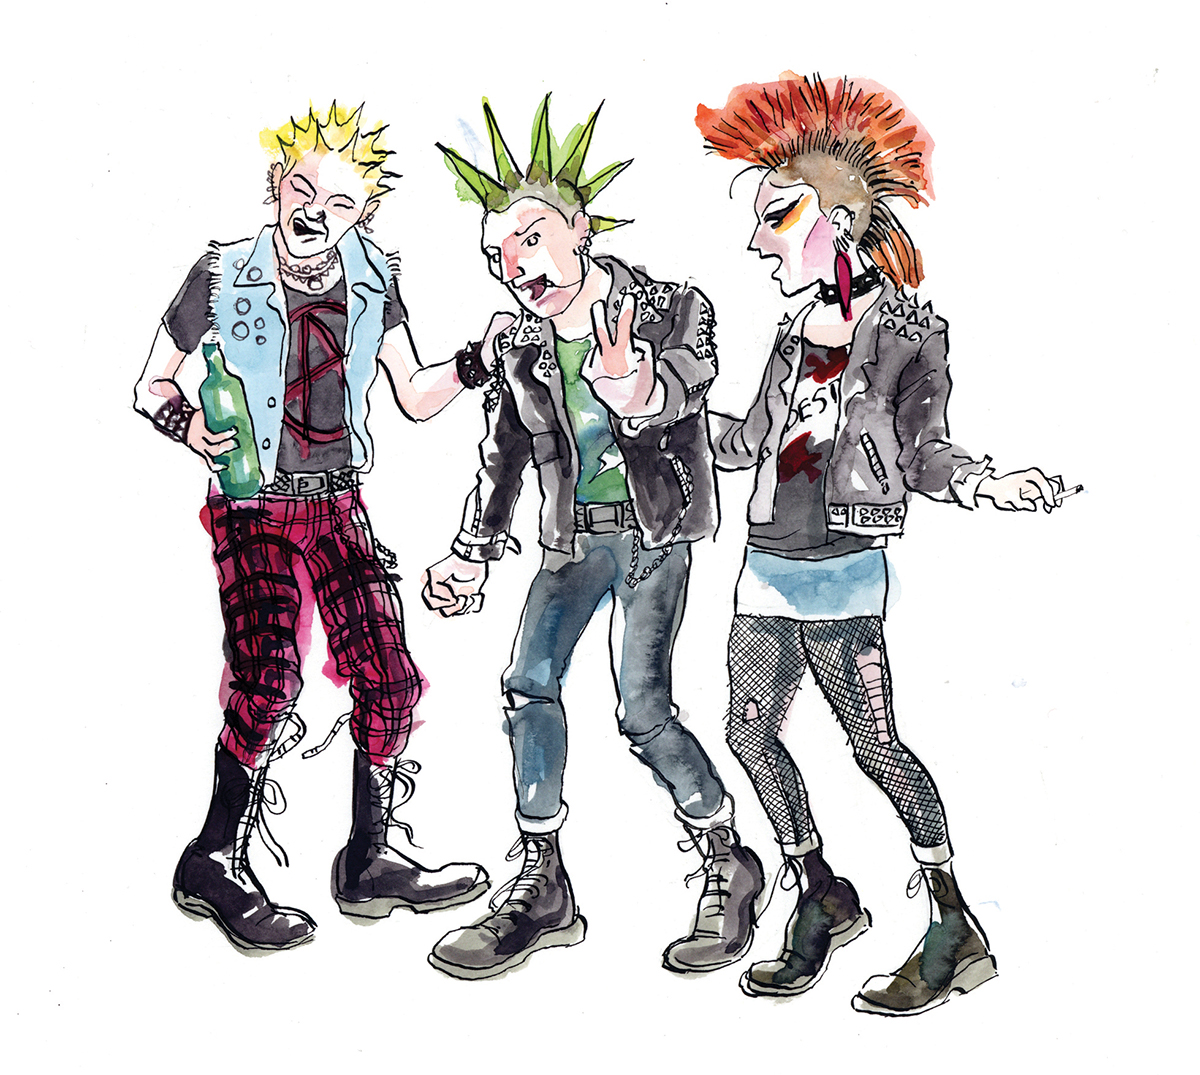 Subcultures mods punks Goths rockers ink